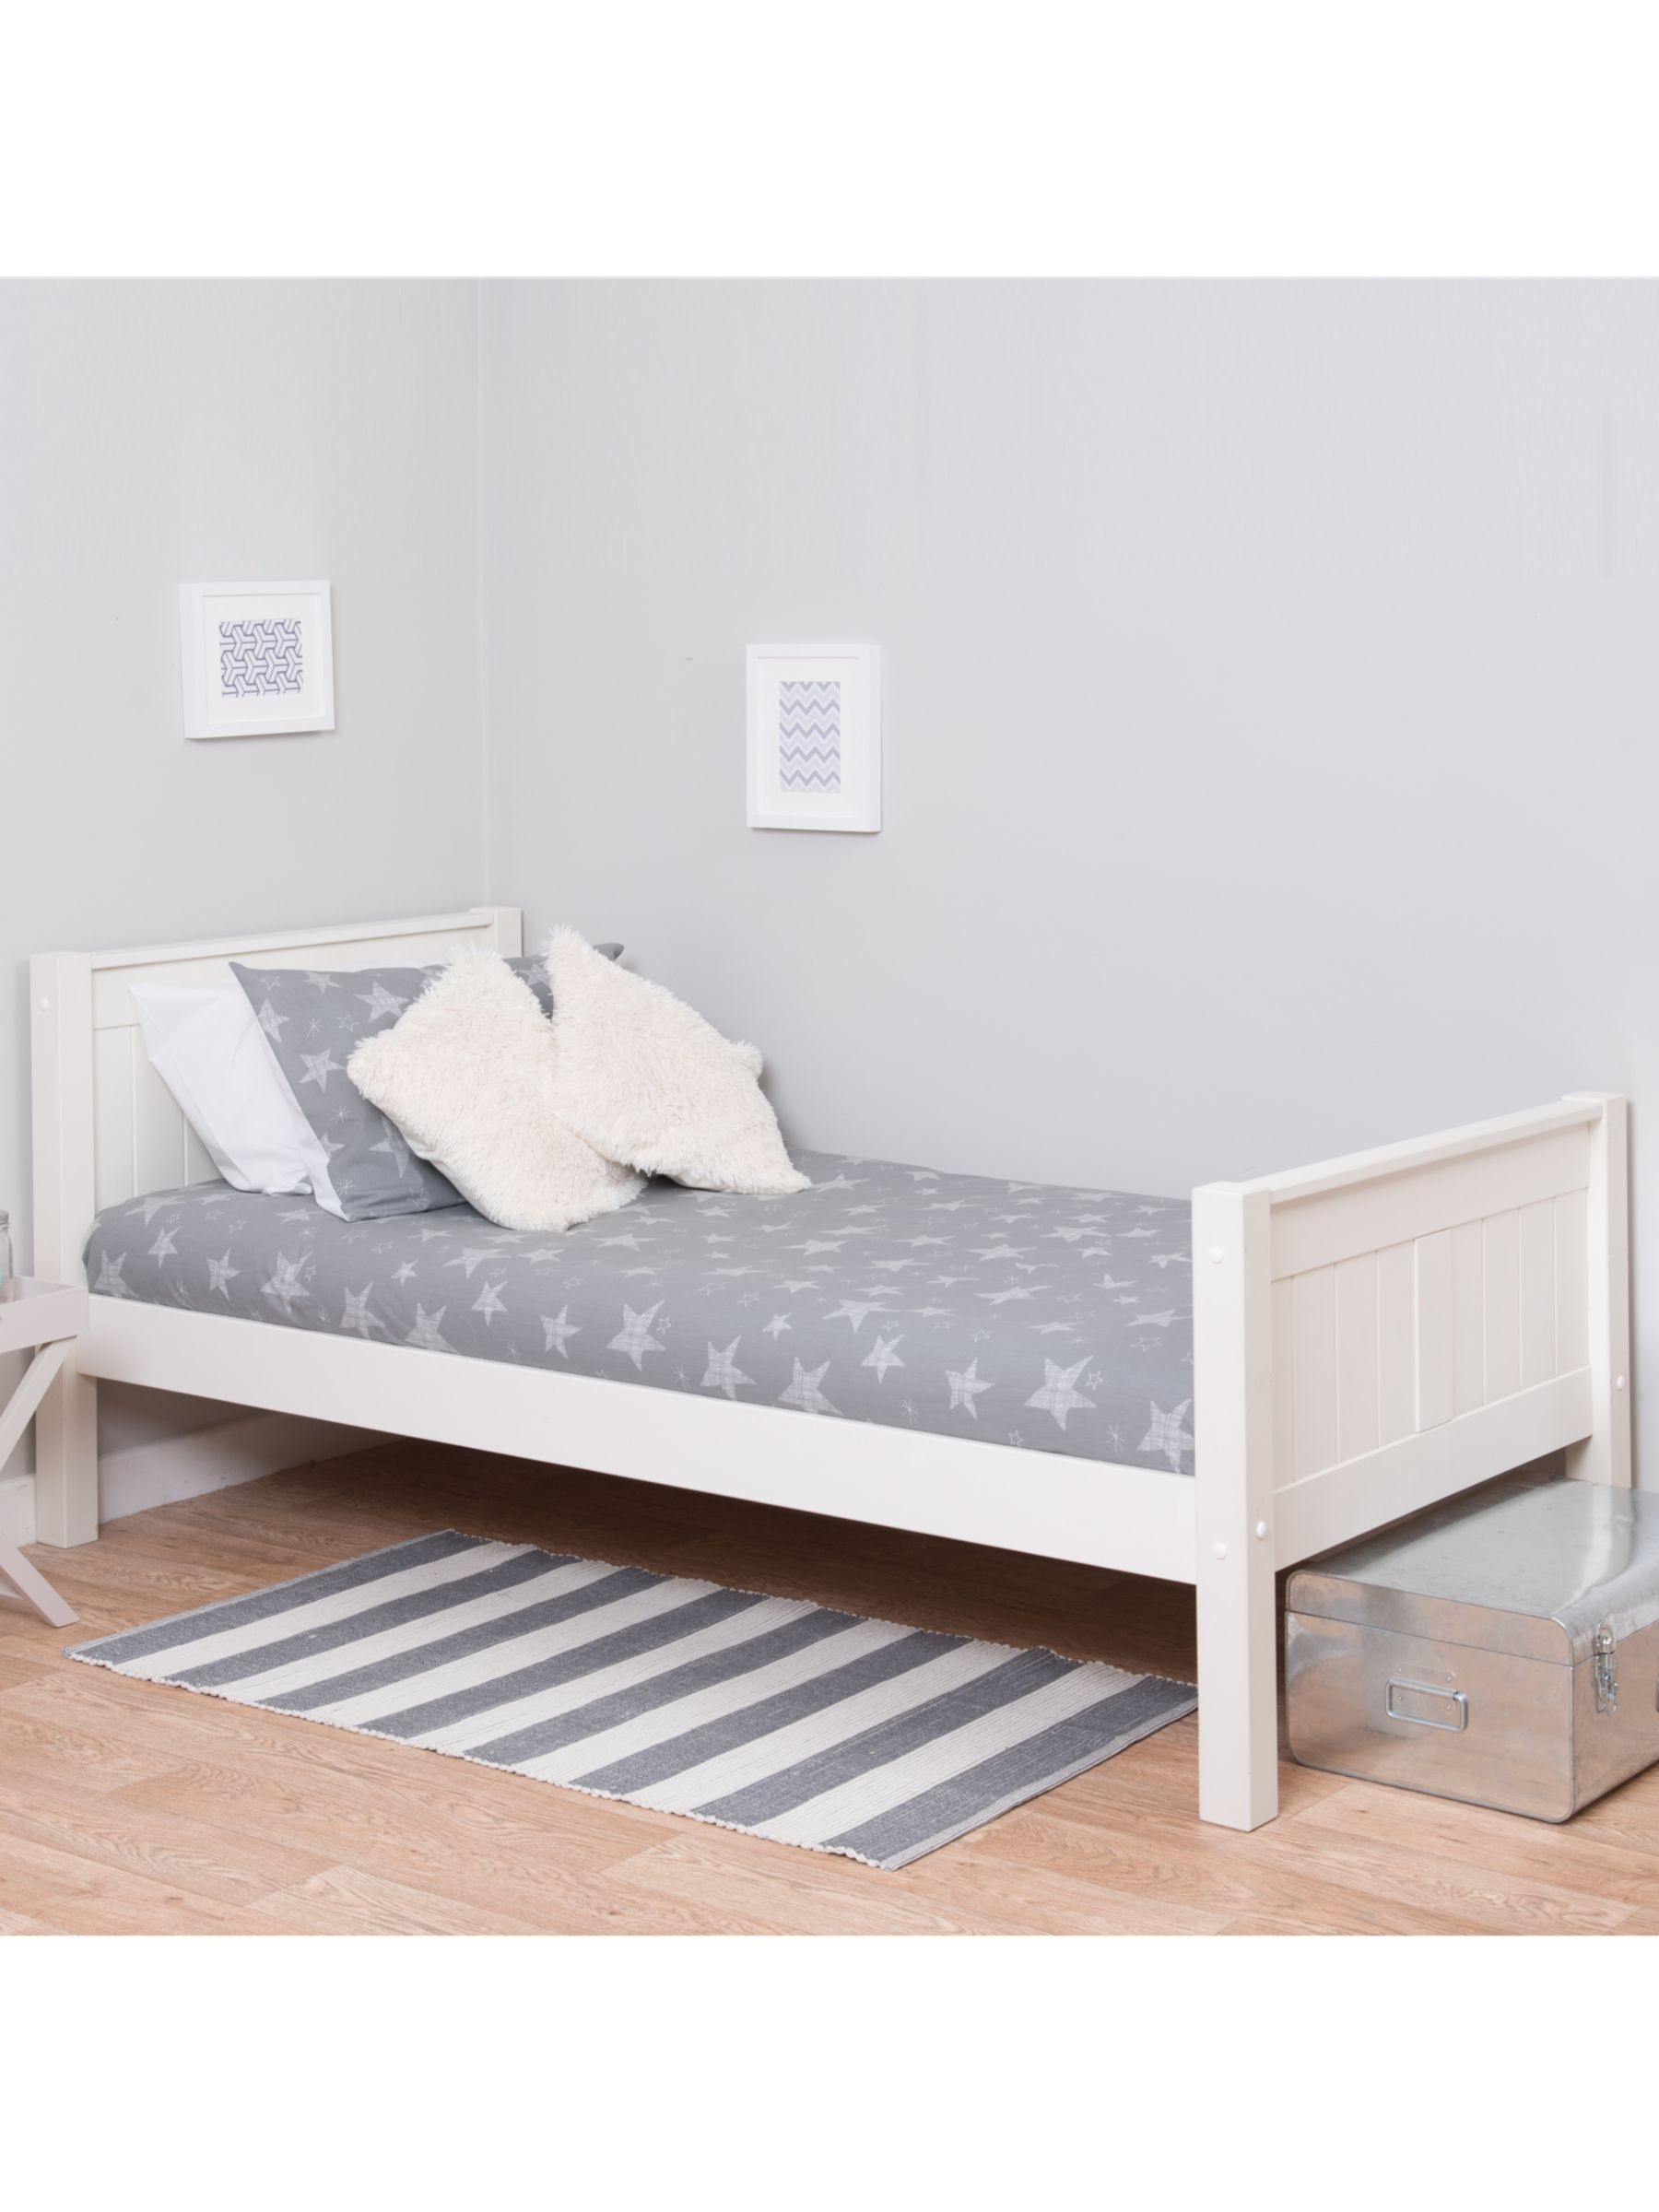 Photo of Stompa classic child compliant bed frame single white